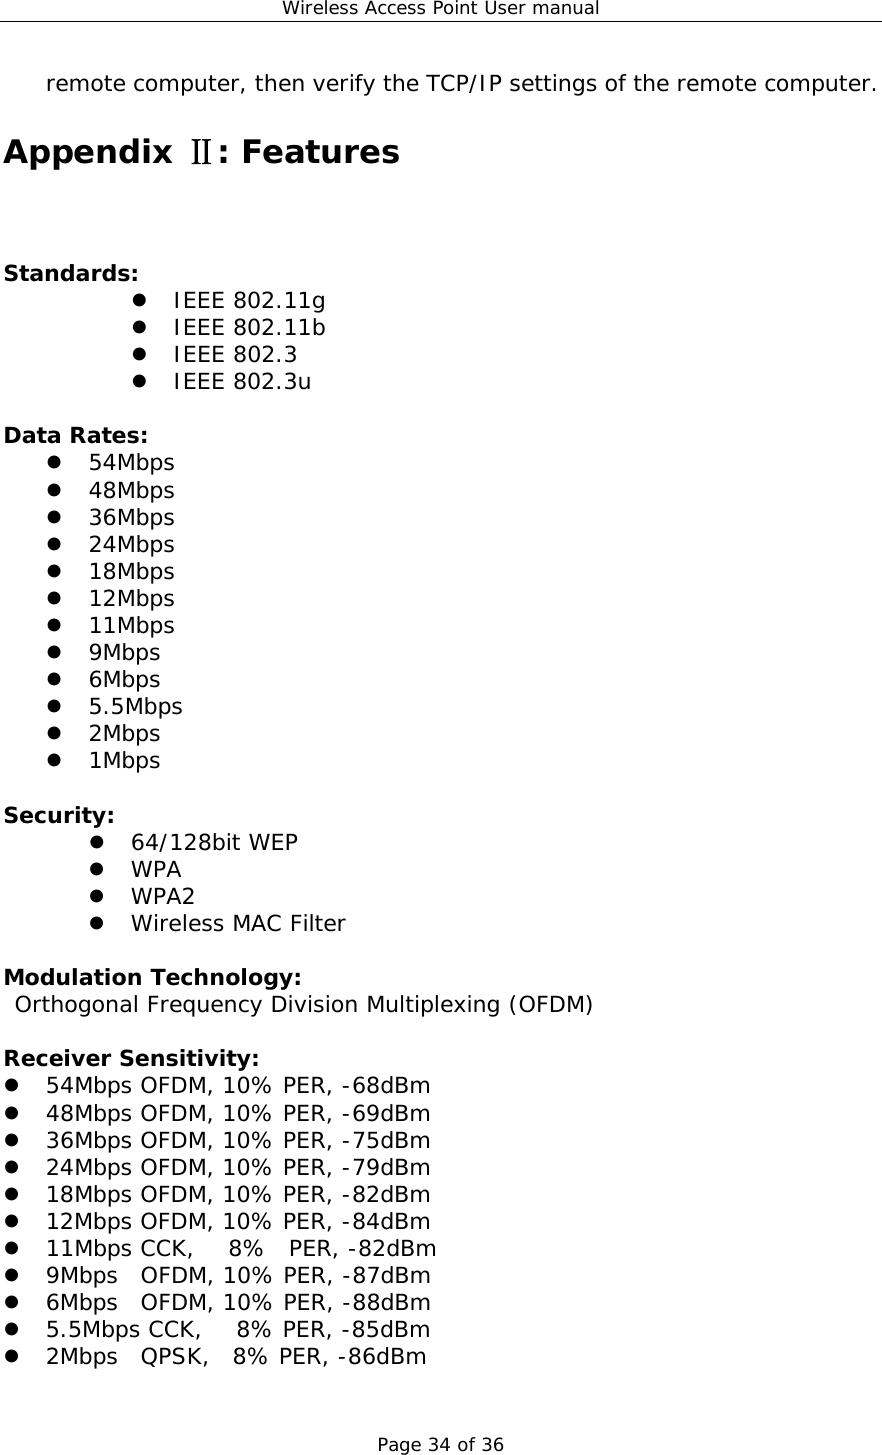 Wireless Access Point User manual Page 34 of 36 remote computer, then verify the TCP/IP settings of the remote computer. Appendix : FeaturesⅡ Standards:  z IEEE 802.11g z IEEE 802.11b z IEEE 802.3 z IEEE 802.3u  Data Rates: z 54Mbps z 48Mbps z 36Mbps z 24Mbps z 18Mbps z 12Mbps z 11Mbps z 9Mbps z 6Mbps z 5.5Mbps z 2Mbps z 1Mbps  Security: z 64/128bit WEP z WPA  z WPA2  z Wireless MAC Filter  Modulation Technology:  Orthogonal Frequency Division Multiplexing (OFDM)  Receiver Sensitivity: z 54Mbps OFDM, 10% PER, -68dBm z 48Mbps OFDM, 10% PER, -69dBm z 36Mbps OFDM, 10% PER, -75dBm z 24Mbps OFDM, 10% PER, -79dBm z 18Mbps OFDM, 10% PER, -82dBm z 12Mbps OFDM, 10% PER, -84dBm z 11Mbps CCK,   8%  PER, -82dBm z 9Mbps  OFDM, 10% PER, -87dBm z 6Mbps  OFDM, 10% PER, -88dBm z 5.5Mbps CCK,   8% PER, -85dBm z 2Mbps  QPSK,  8% PER, -86dBm 